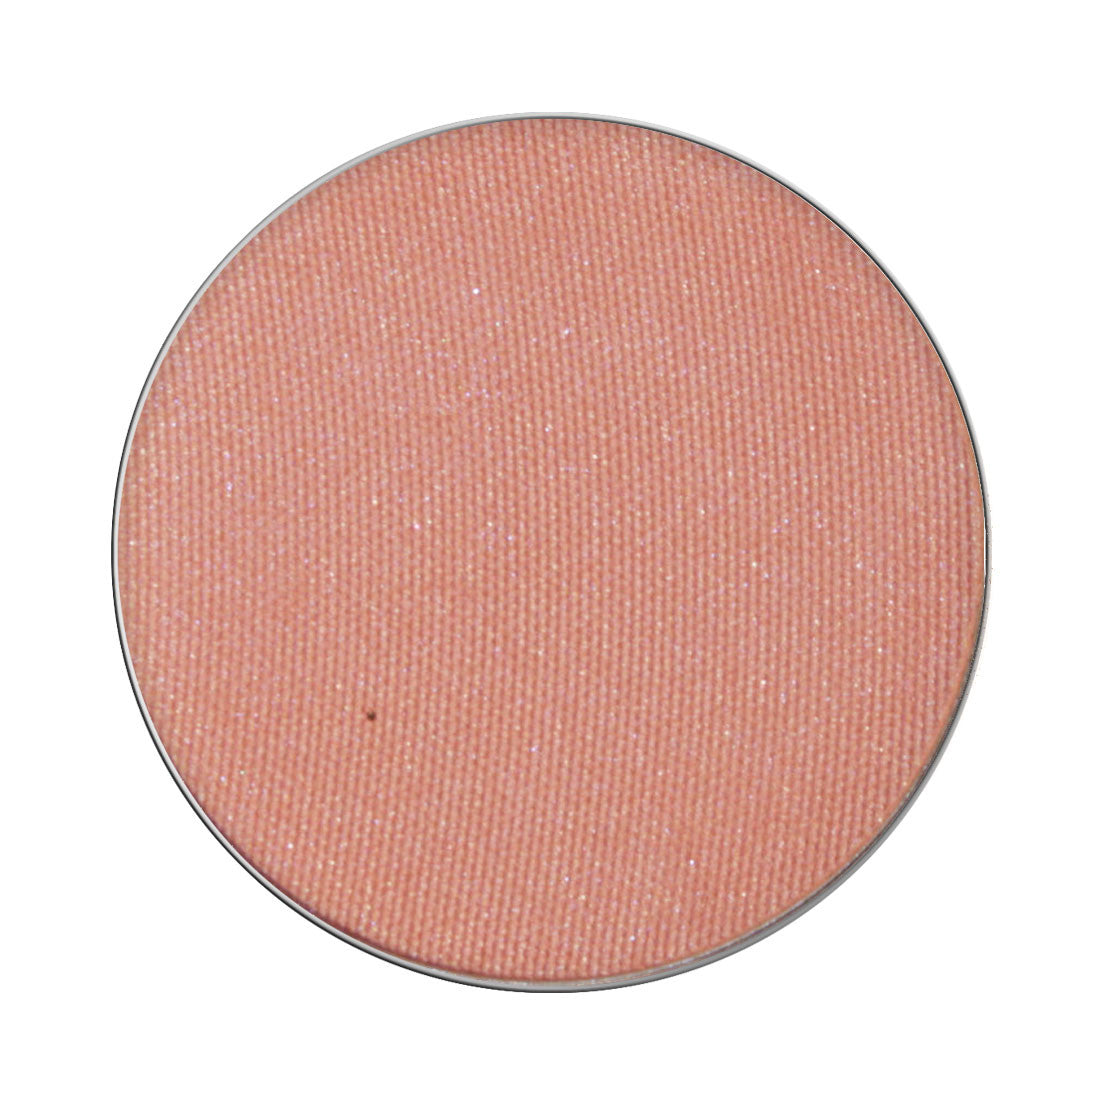 Whiskers Universal Blush in Compact